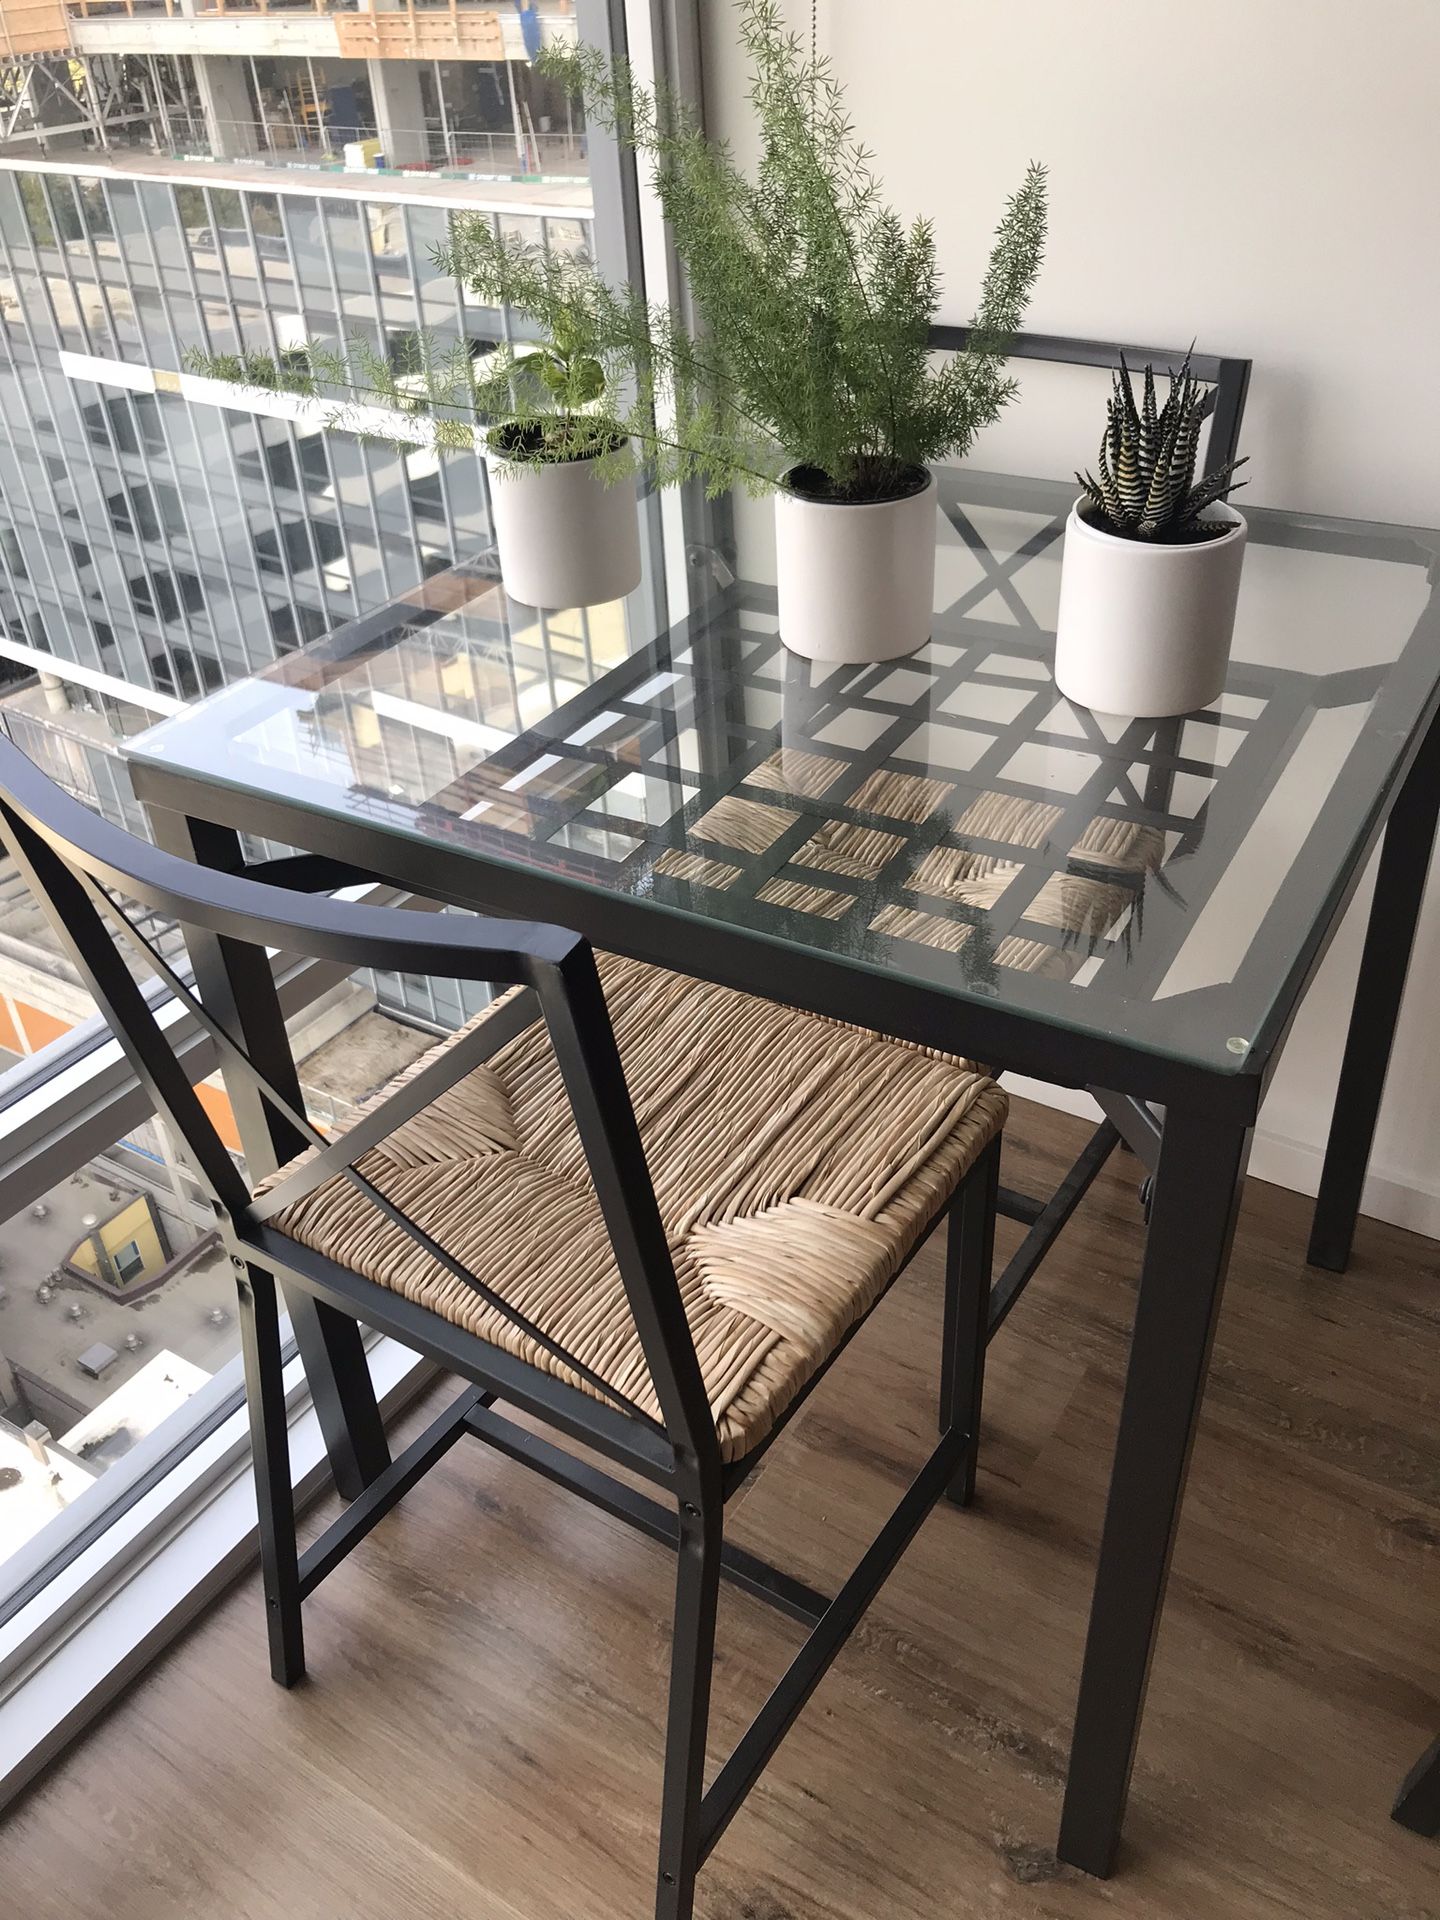 IKEA 2 seater table with chairs